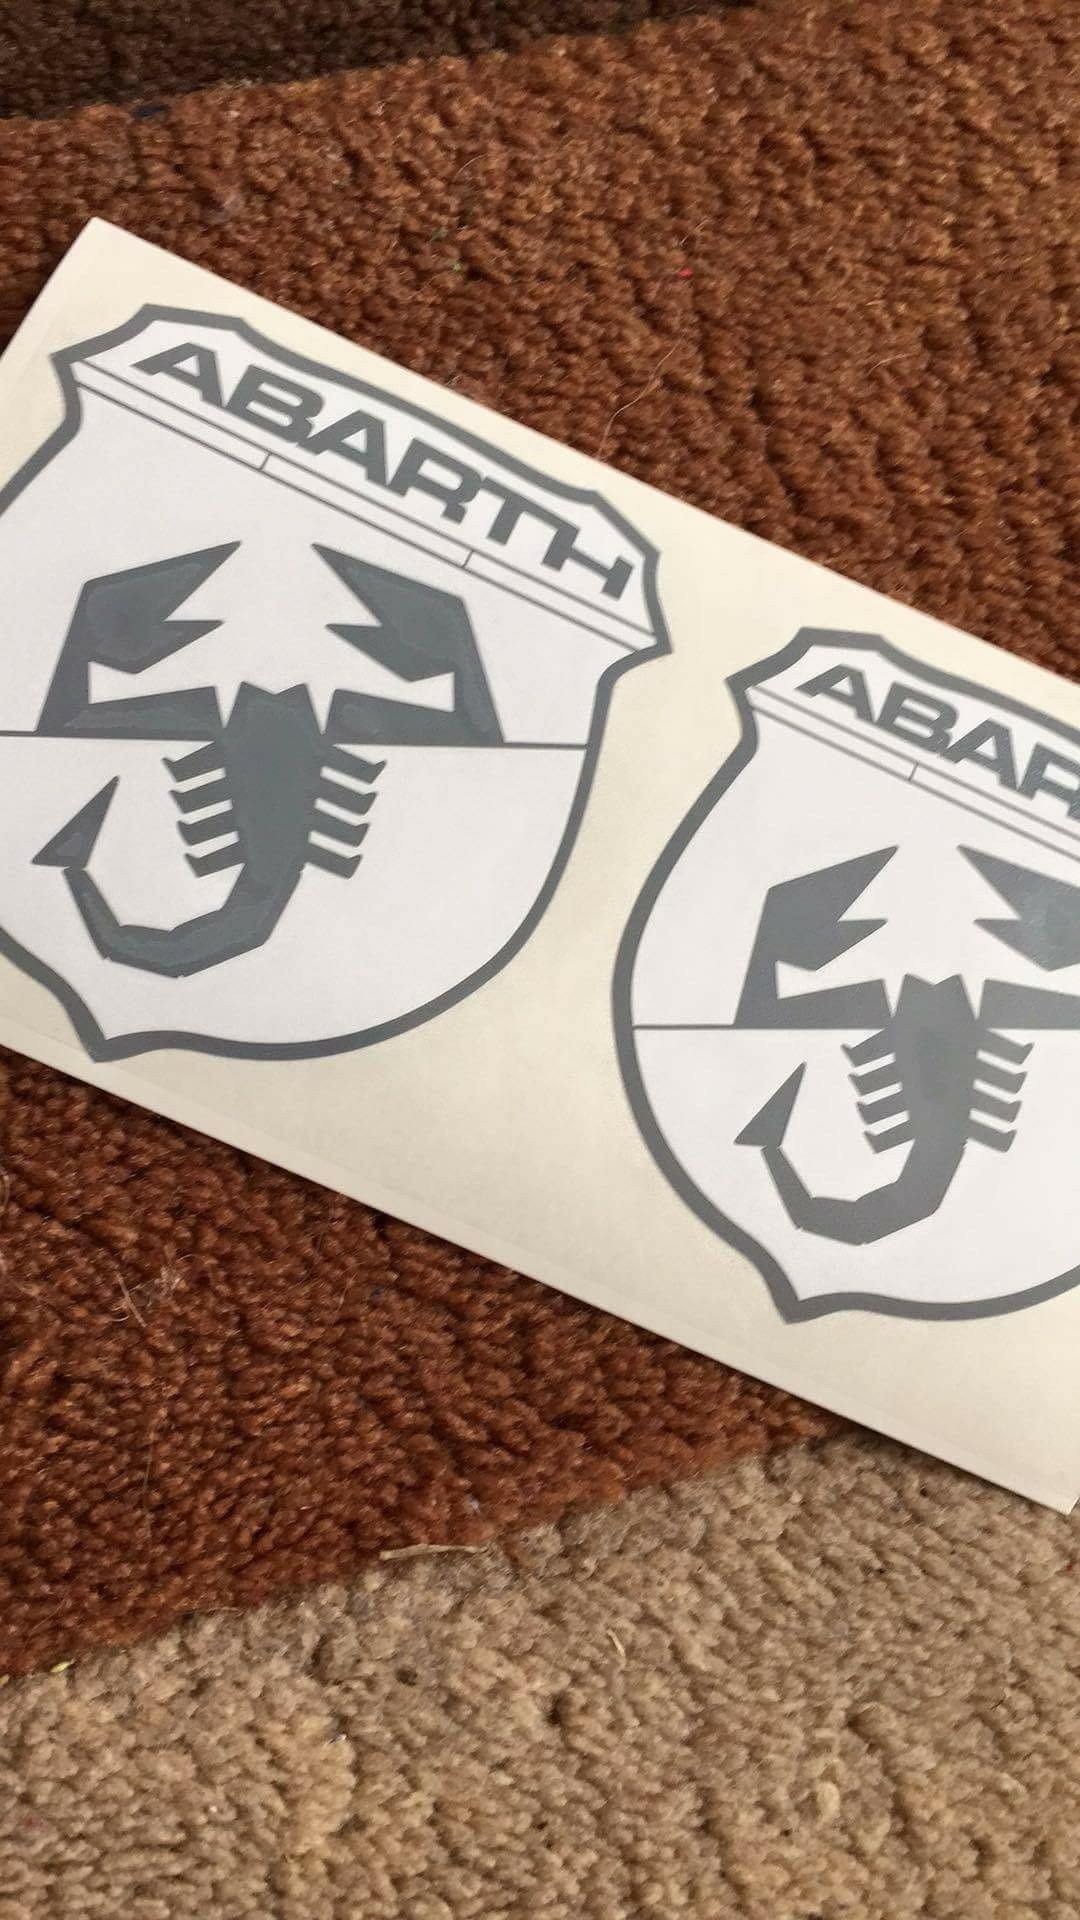 500/595 Badge decals set of four including side badges - Abarth Tuning